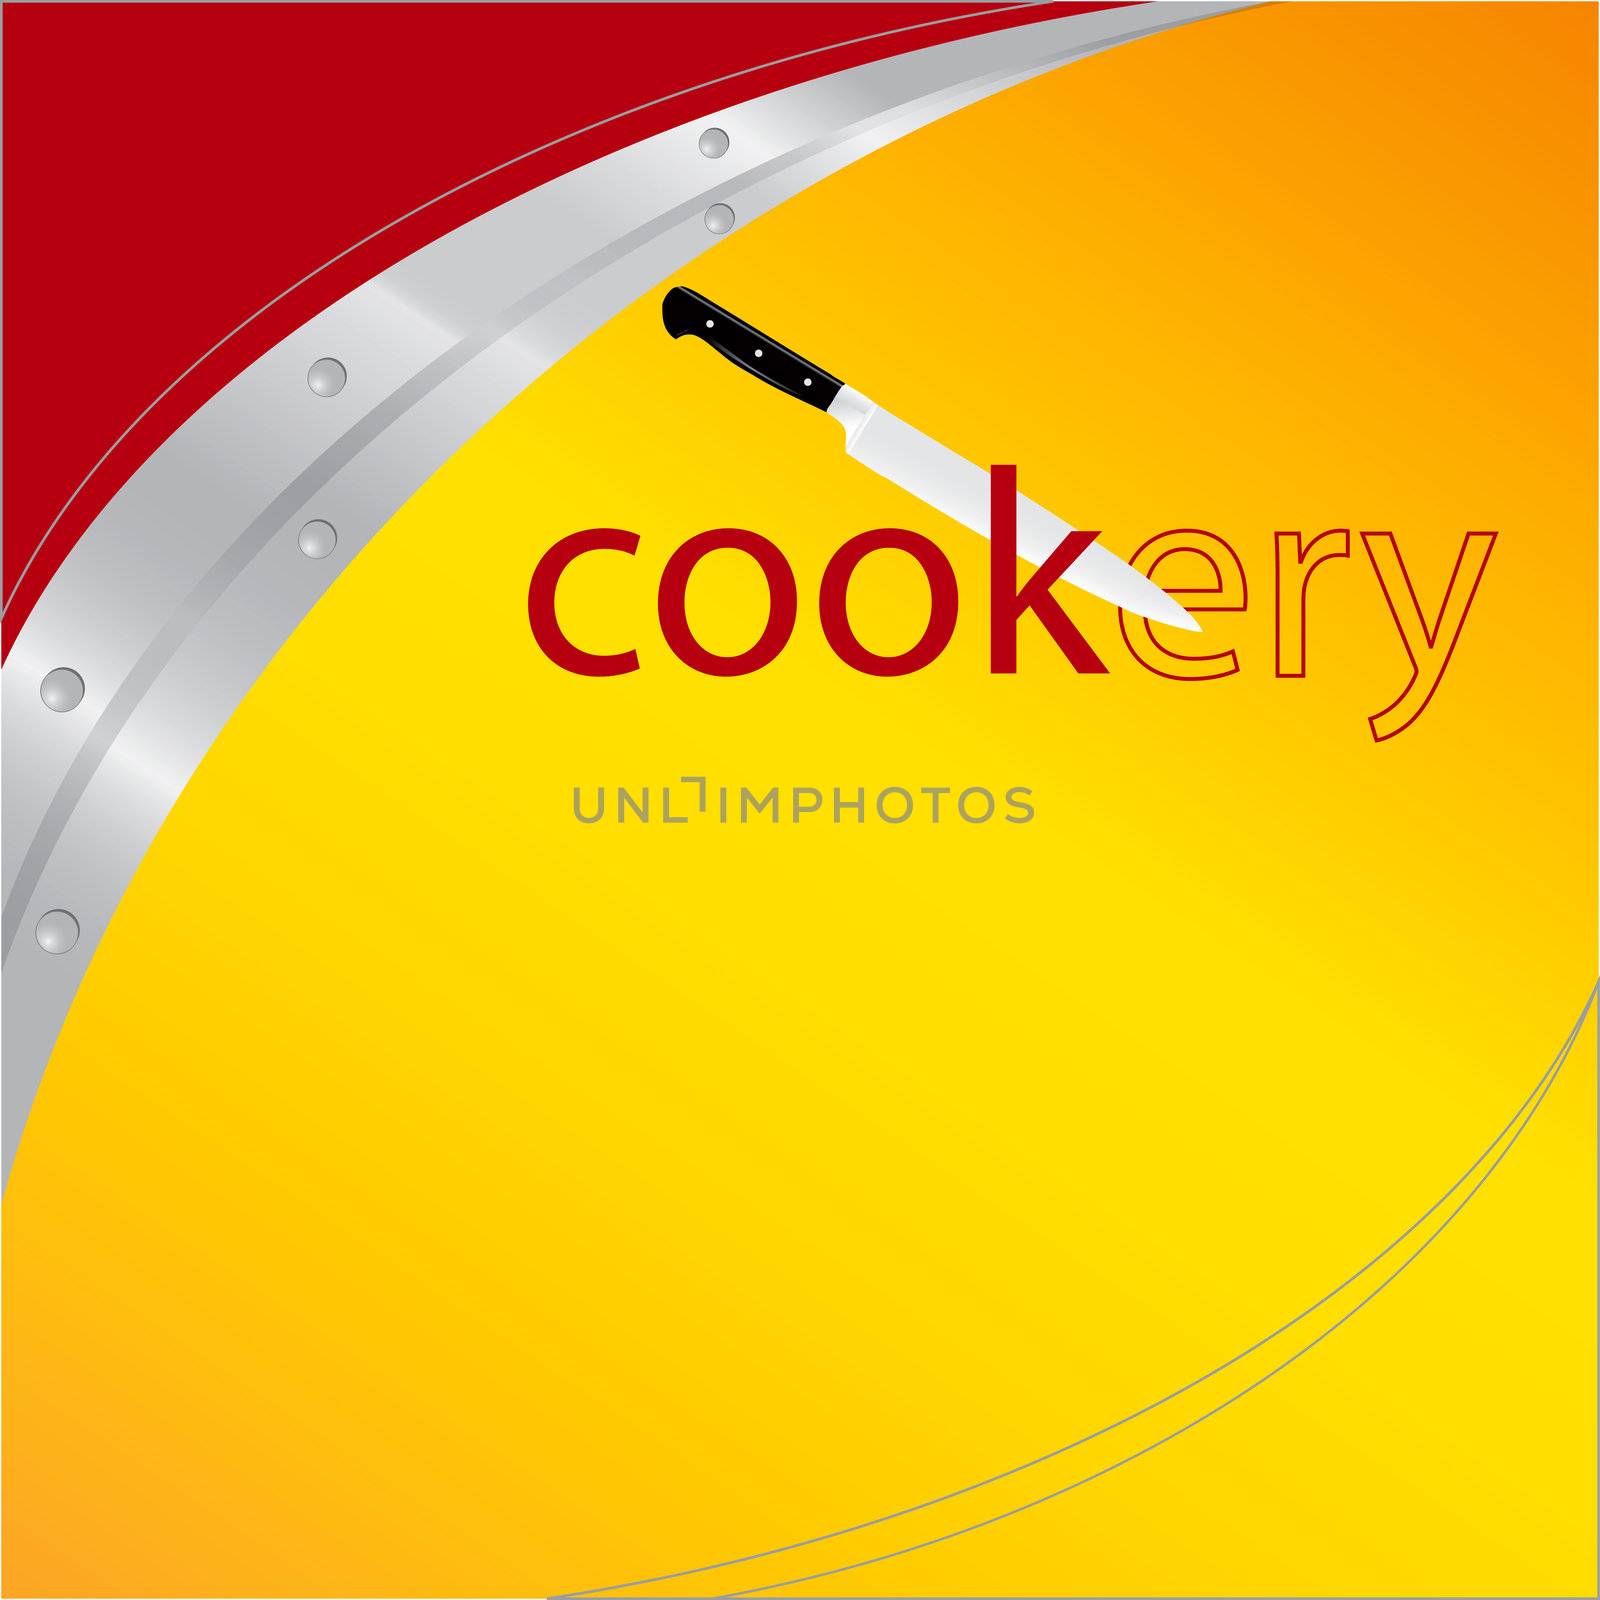 Background on the culinary theme with a kitchen knife. Vector illustration. Transforming words into cookery cook.